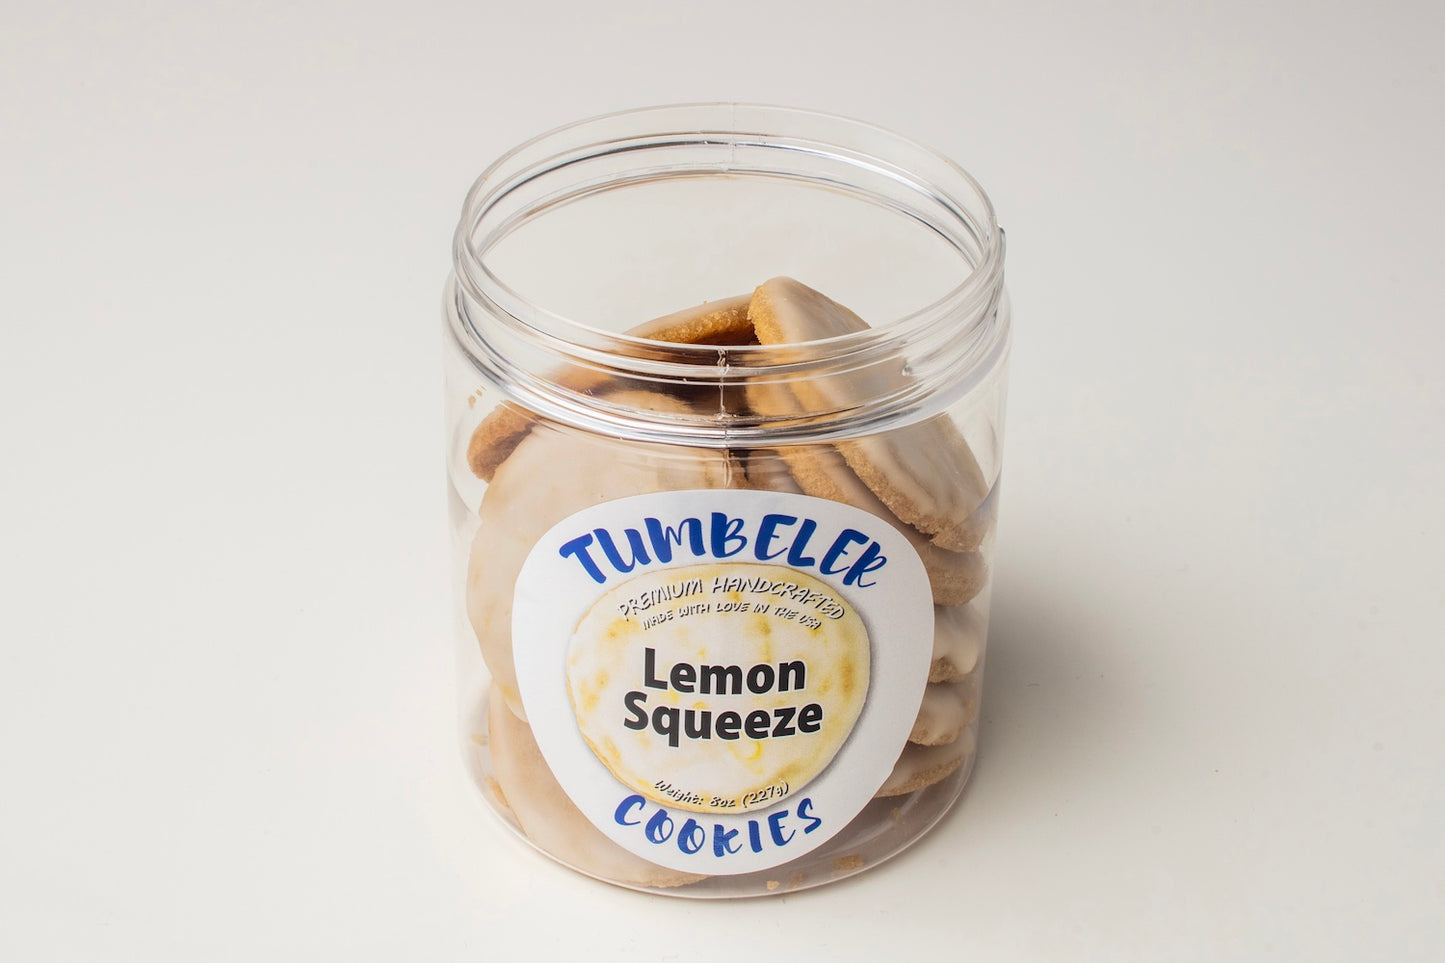 Lemon Squeeze — Tumbeler Cookie with real lemon juice frosting